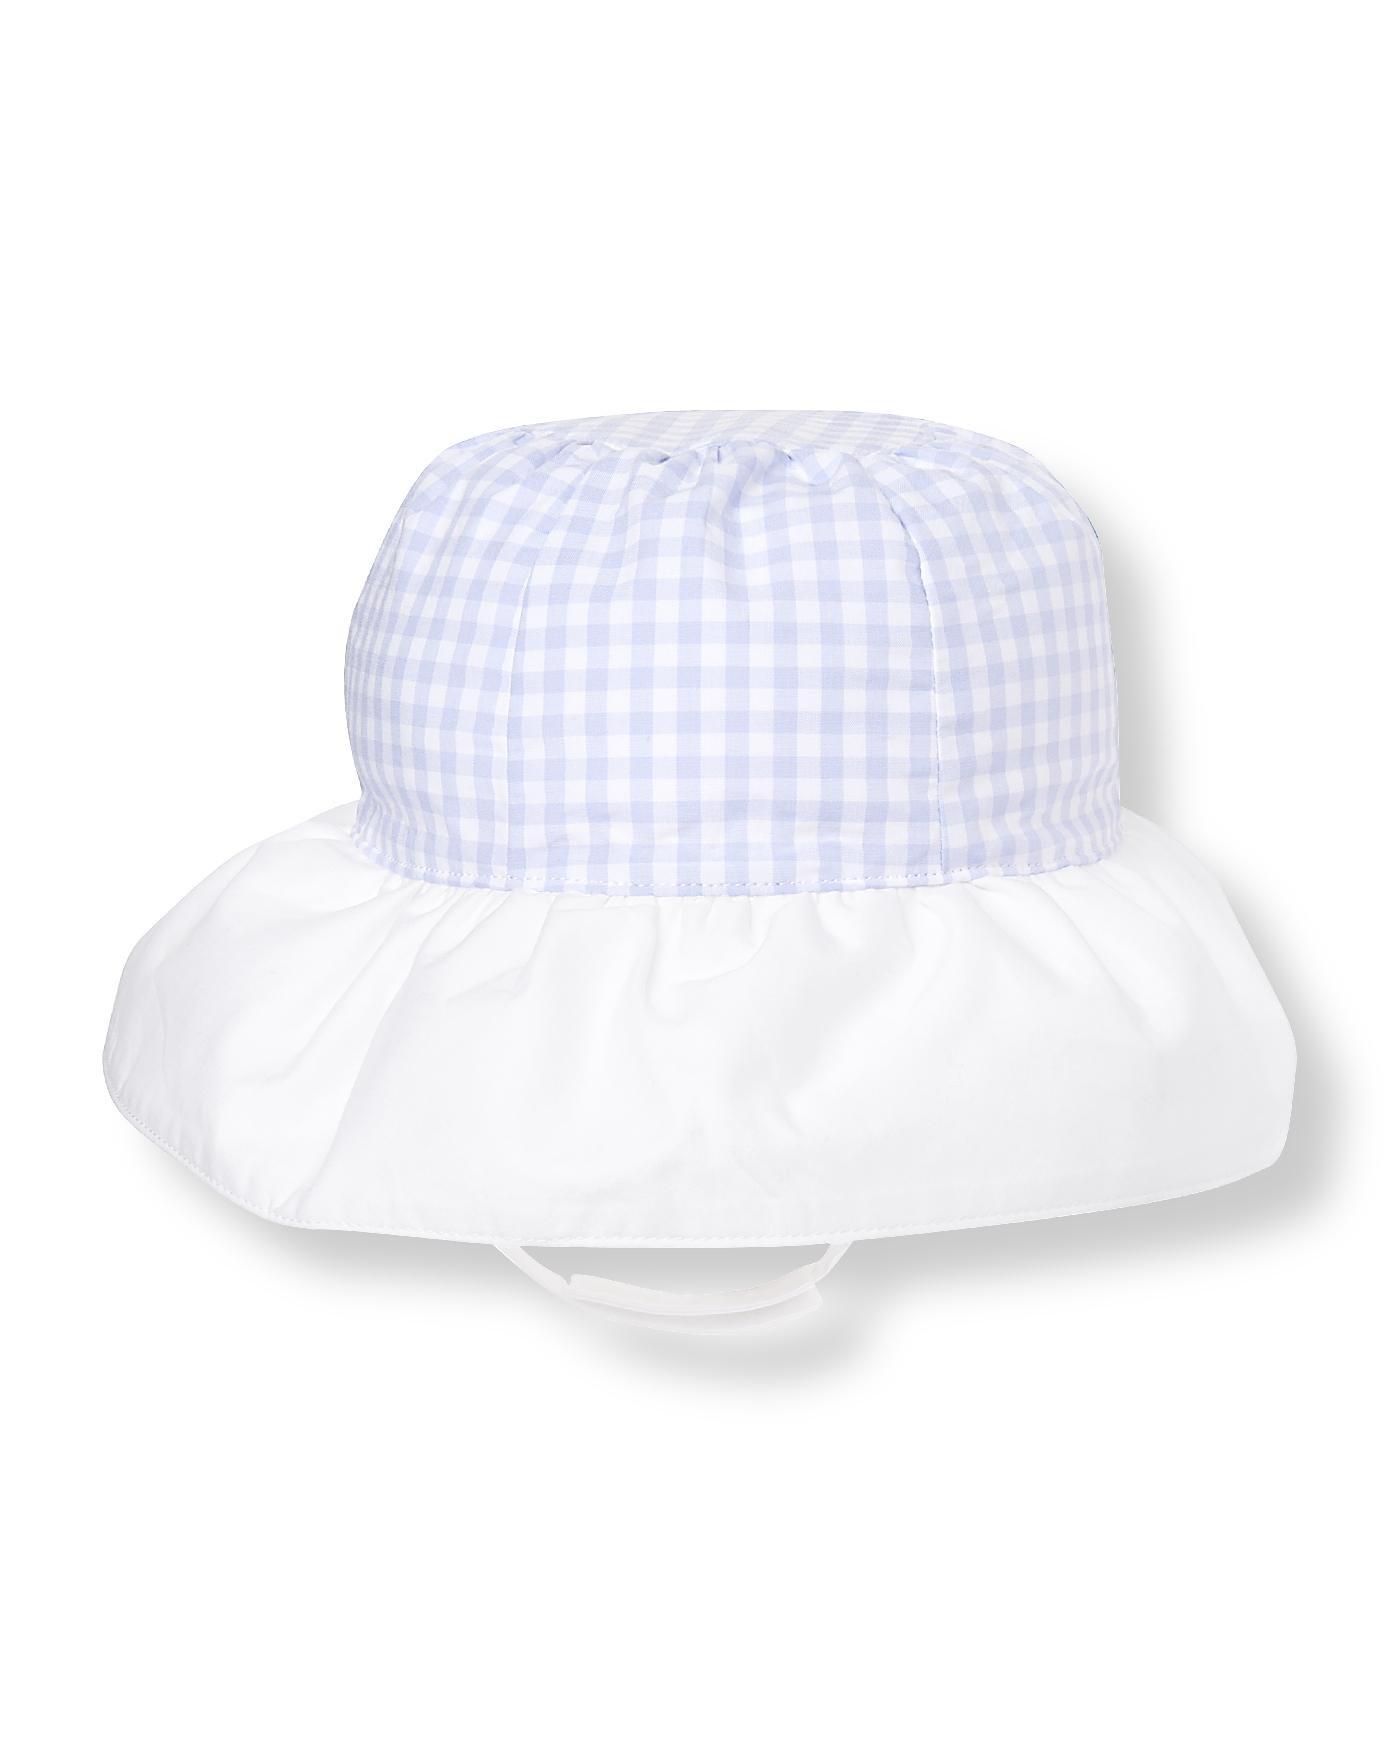 Gingham Sunhat image number 0